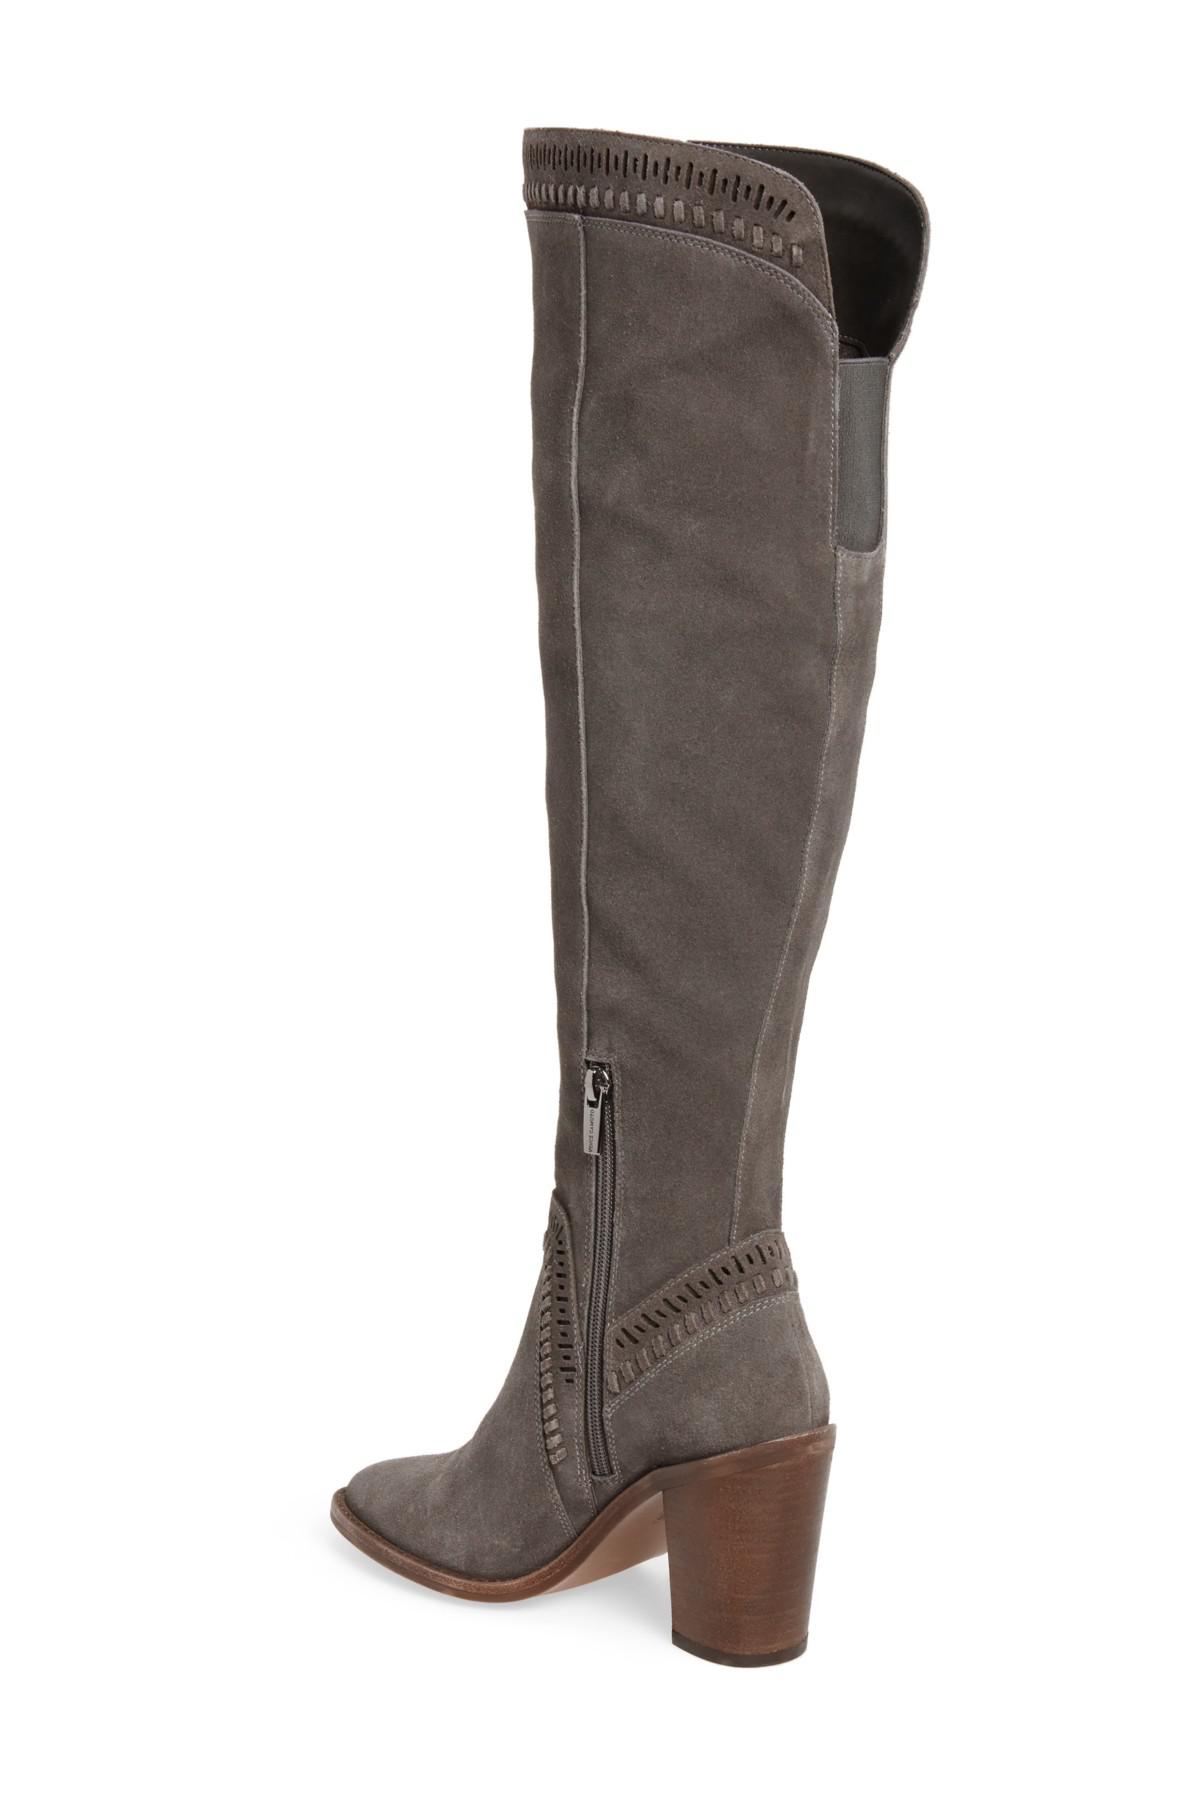 Vince Camuto Suede Madolee Over The Knee Boot in Grey 01 (Gray) - Lyst